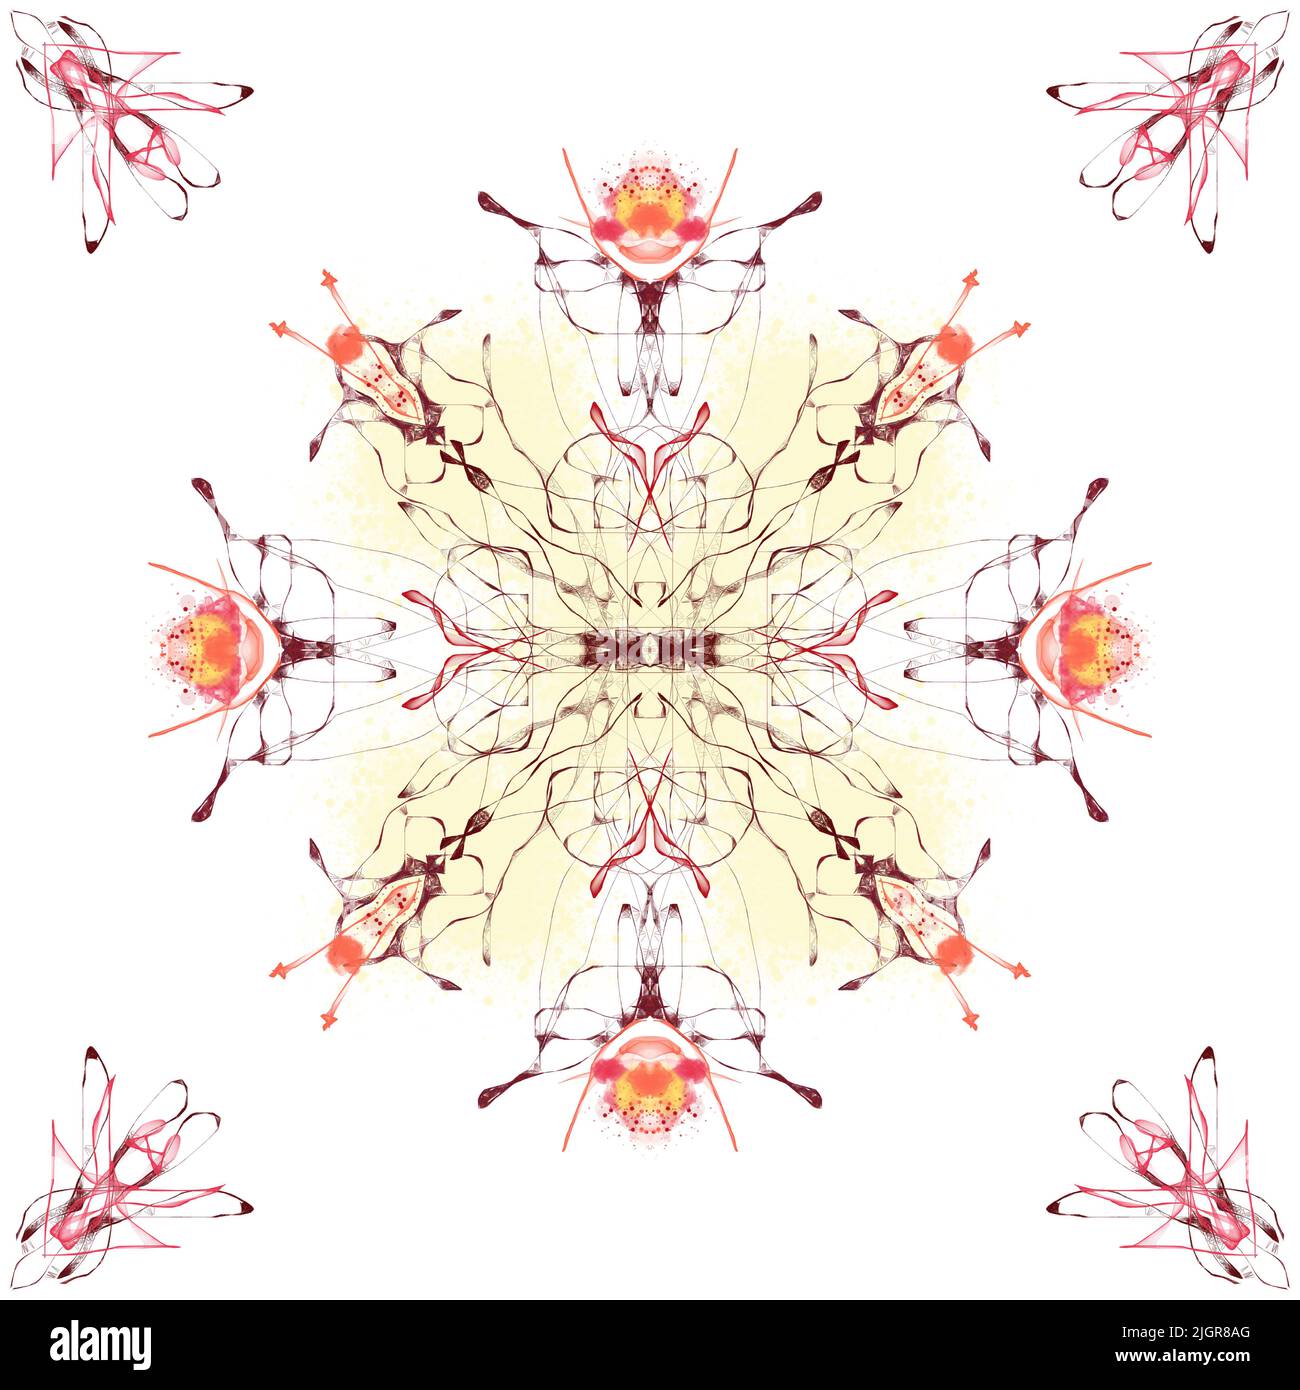 Chromatic pink or burgundy insect and flower isolated pattern on the centre of white squarish background. Stock Photo